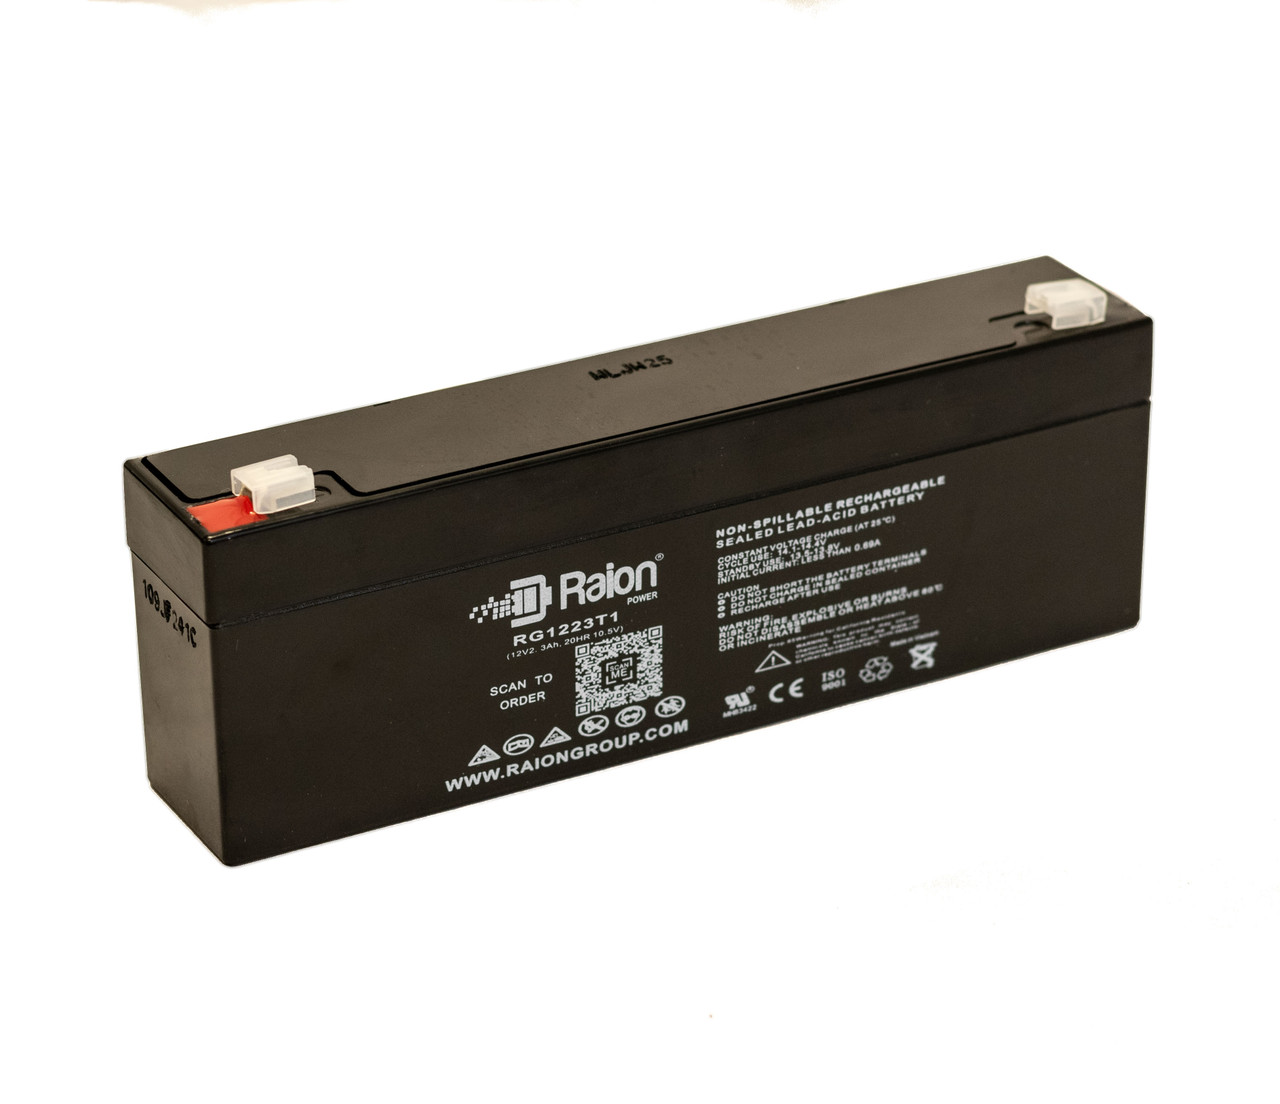 Raion Power RG1223T1 Replacement Battery for Expocell P212/26